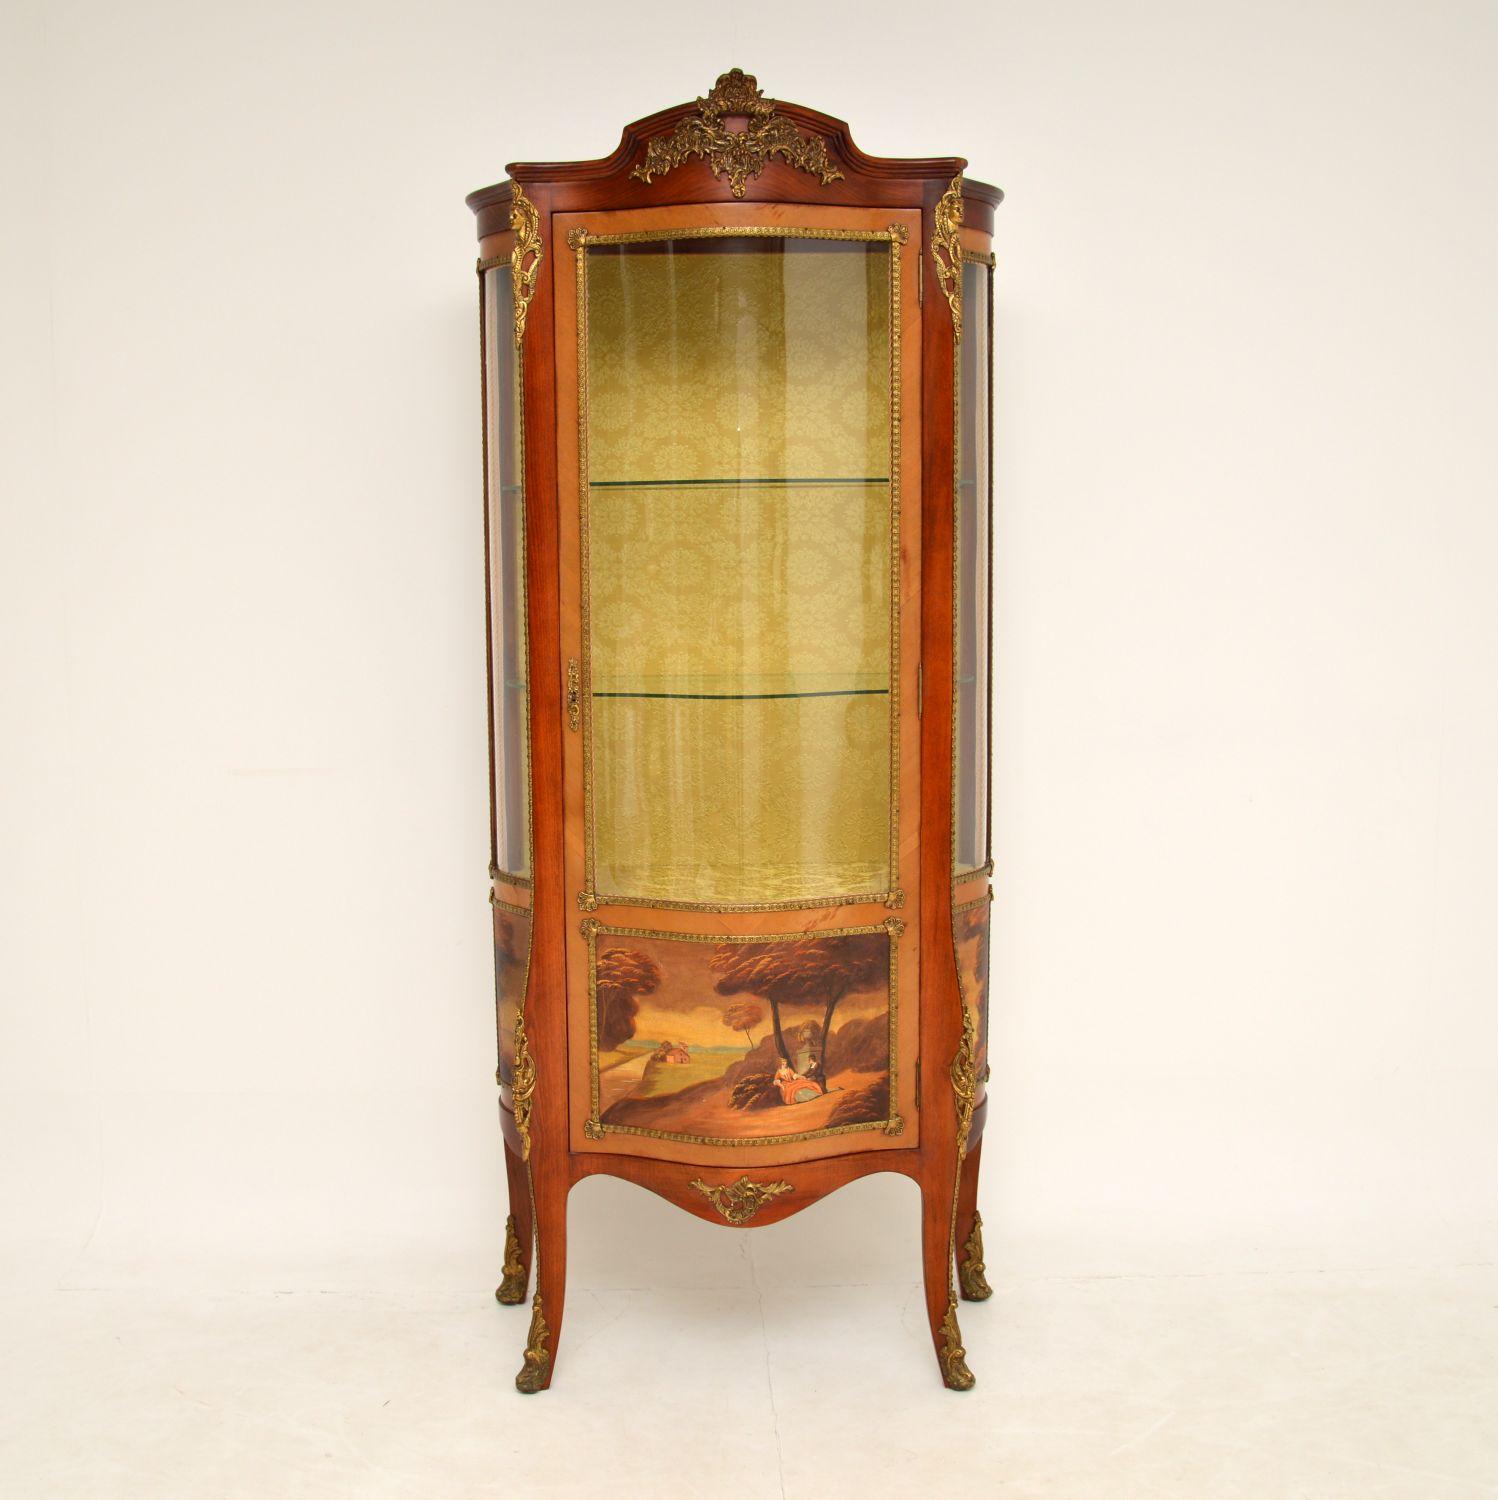 A stunning antique French style display cabinet with a serpentine glass front. This cabinet has the Epstein label inside & it dates from around the 1930’s period.

The quality is fantastic, with gorgeous gilt bronze mounts and beautiful painted